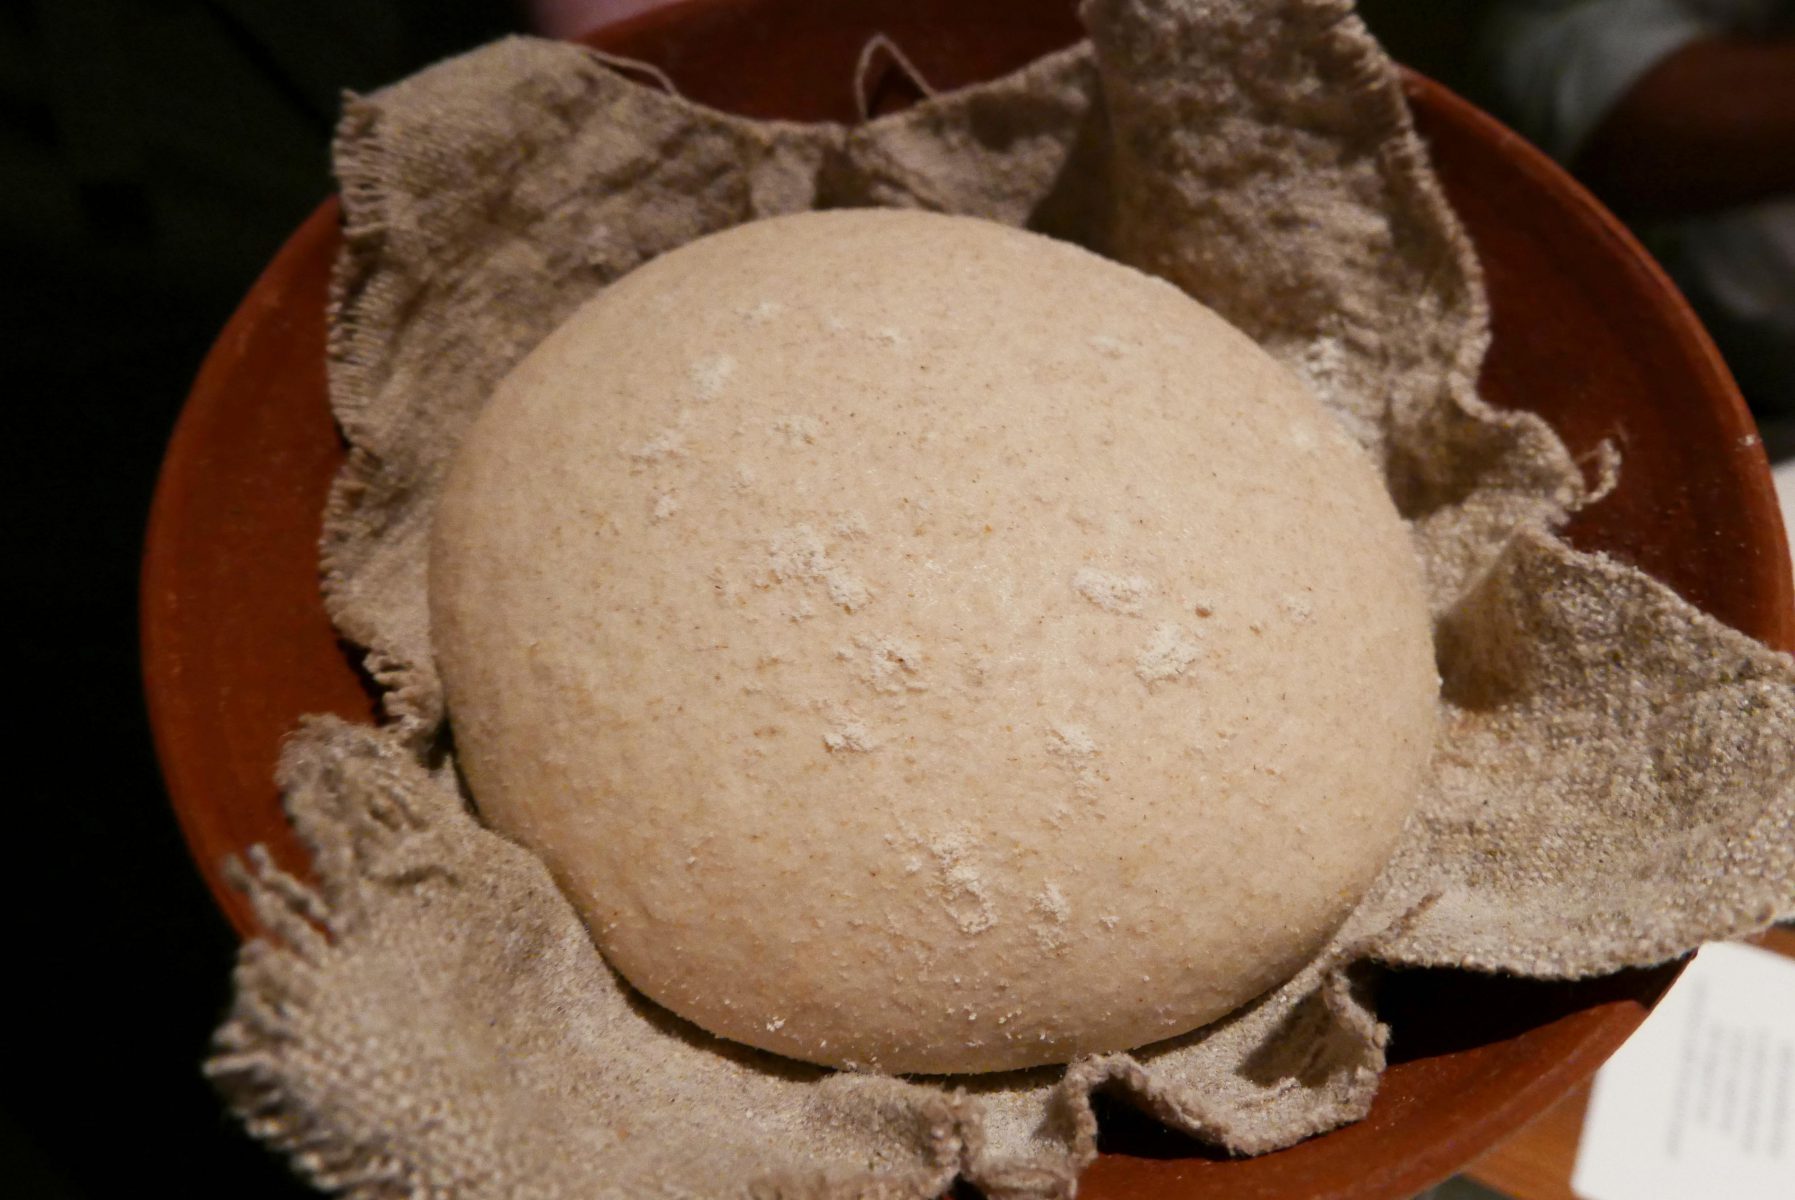 Bread dough (the grilled bread pictured in the very first image)